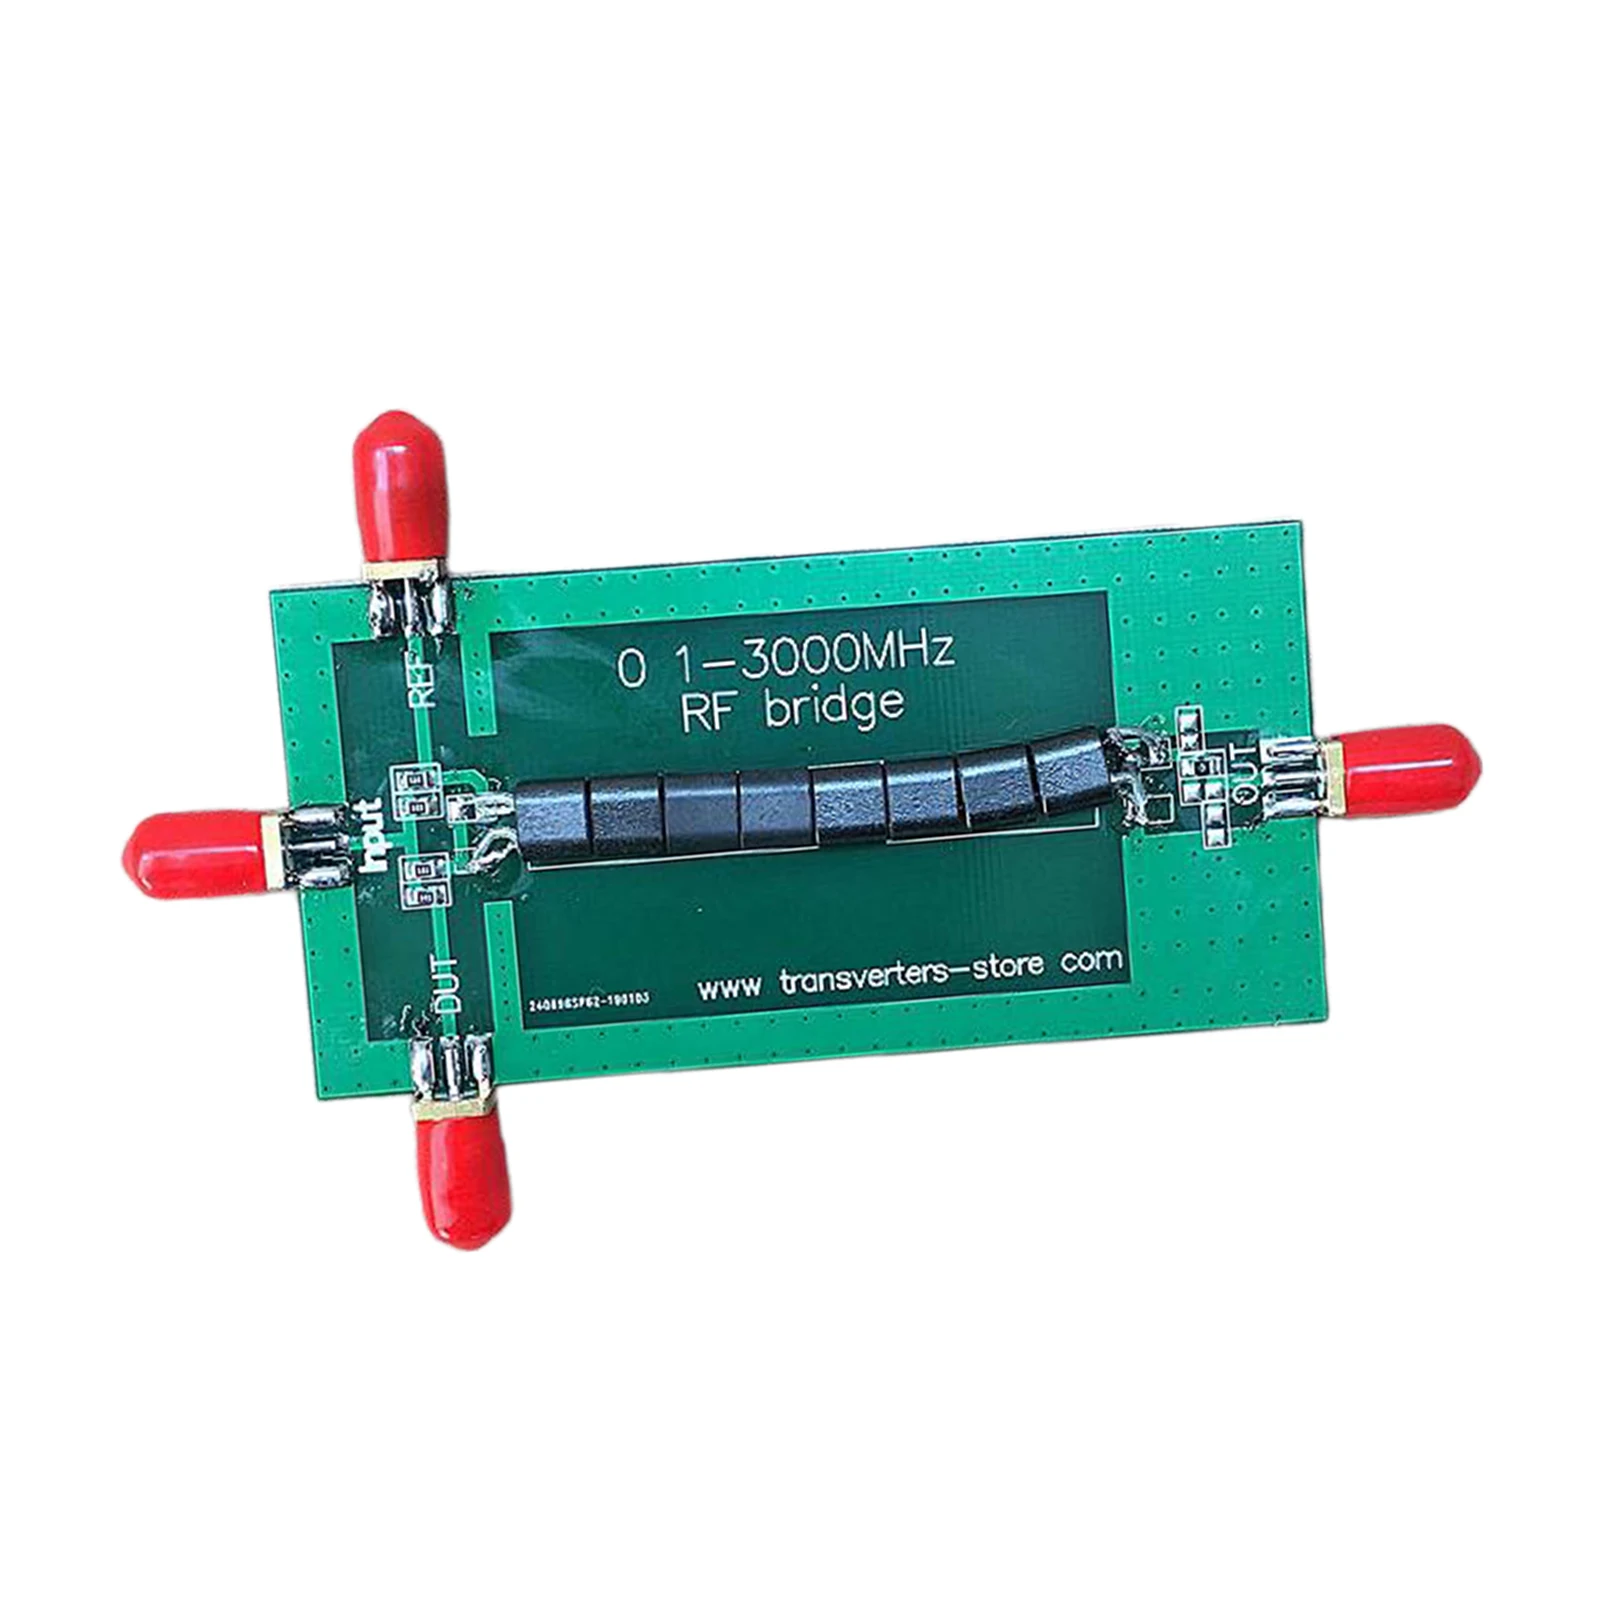 RF Bridge 0.1-3000 MHz Connectors: SMA 45x90x20mm Durable Practical Easy and Conveneint to Use